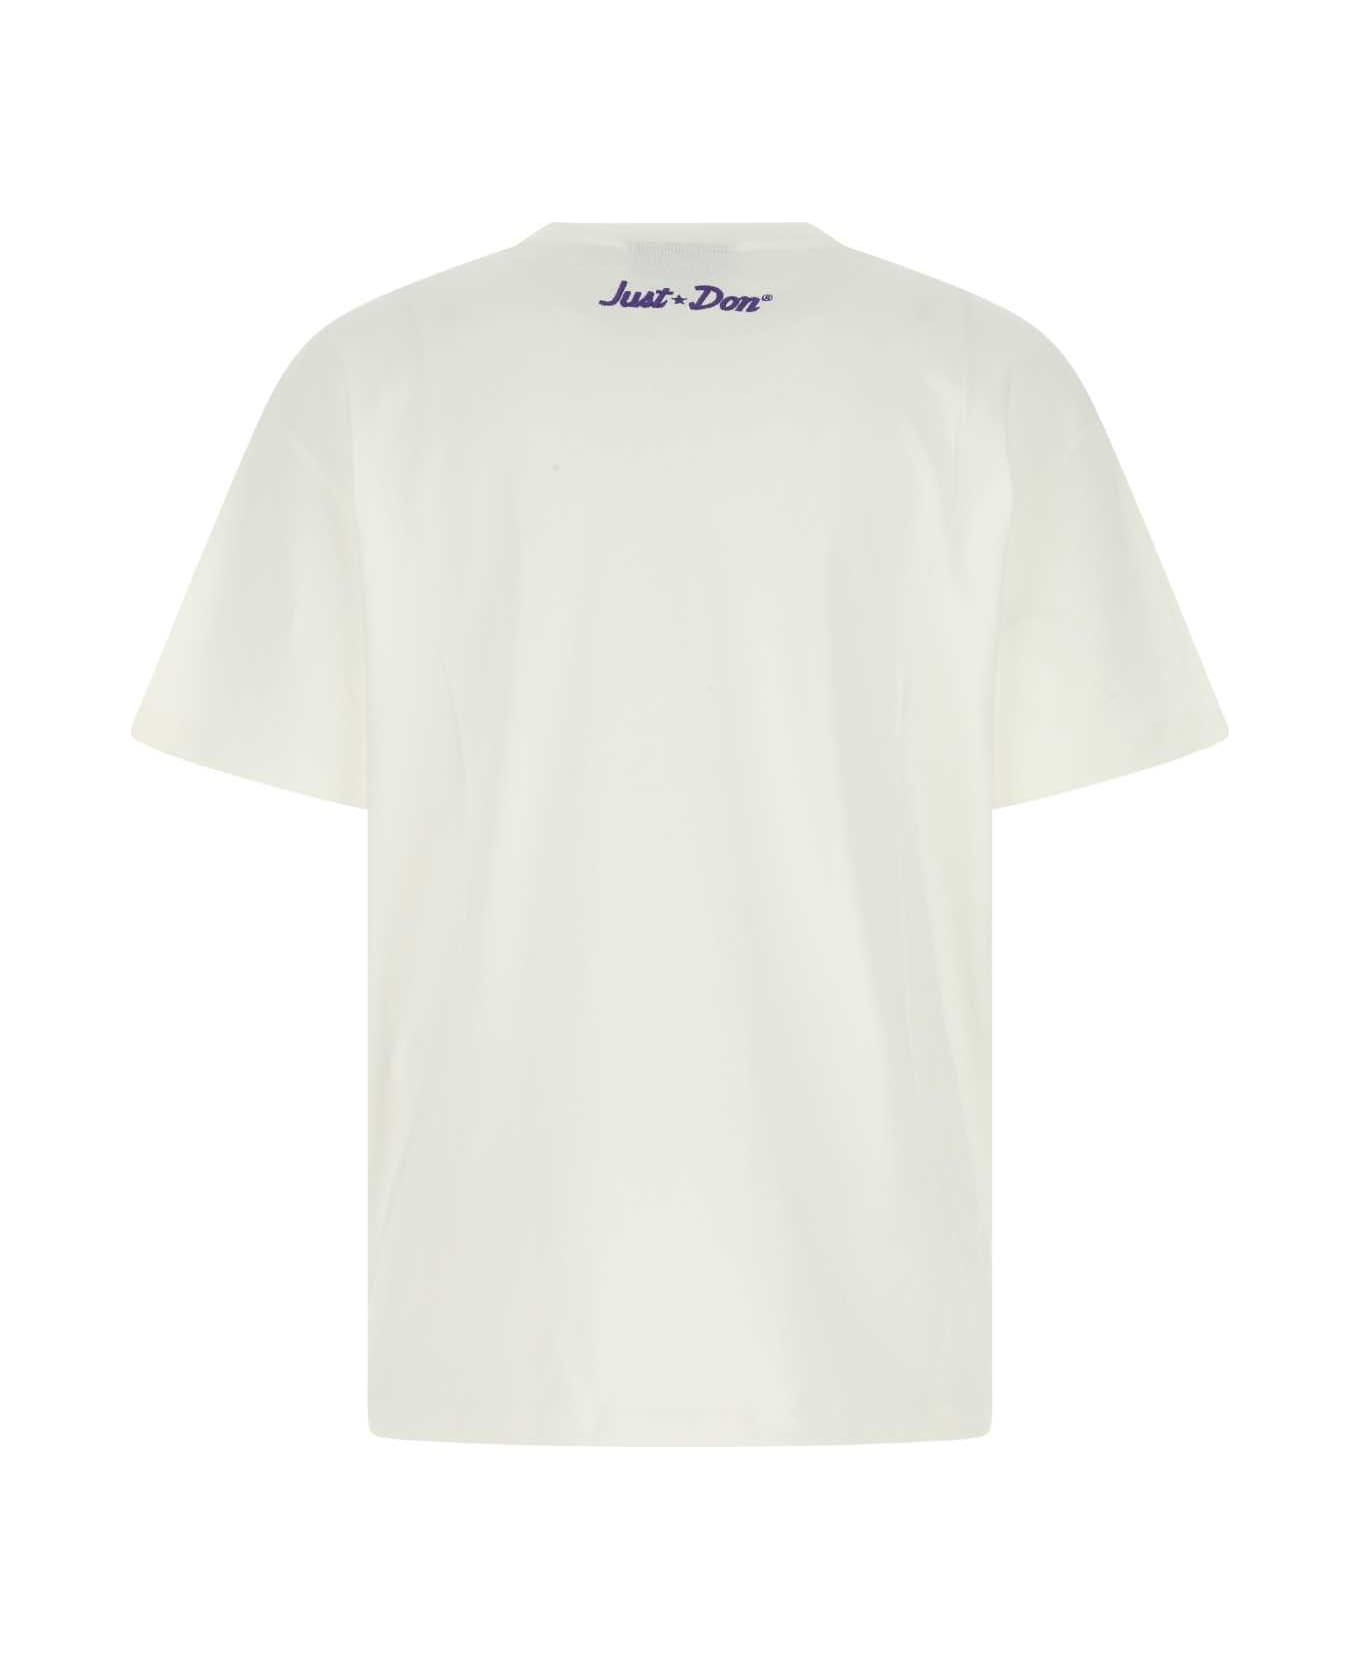 Just Don White Cotton Oversize T-shirt - 02 シャツ